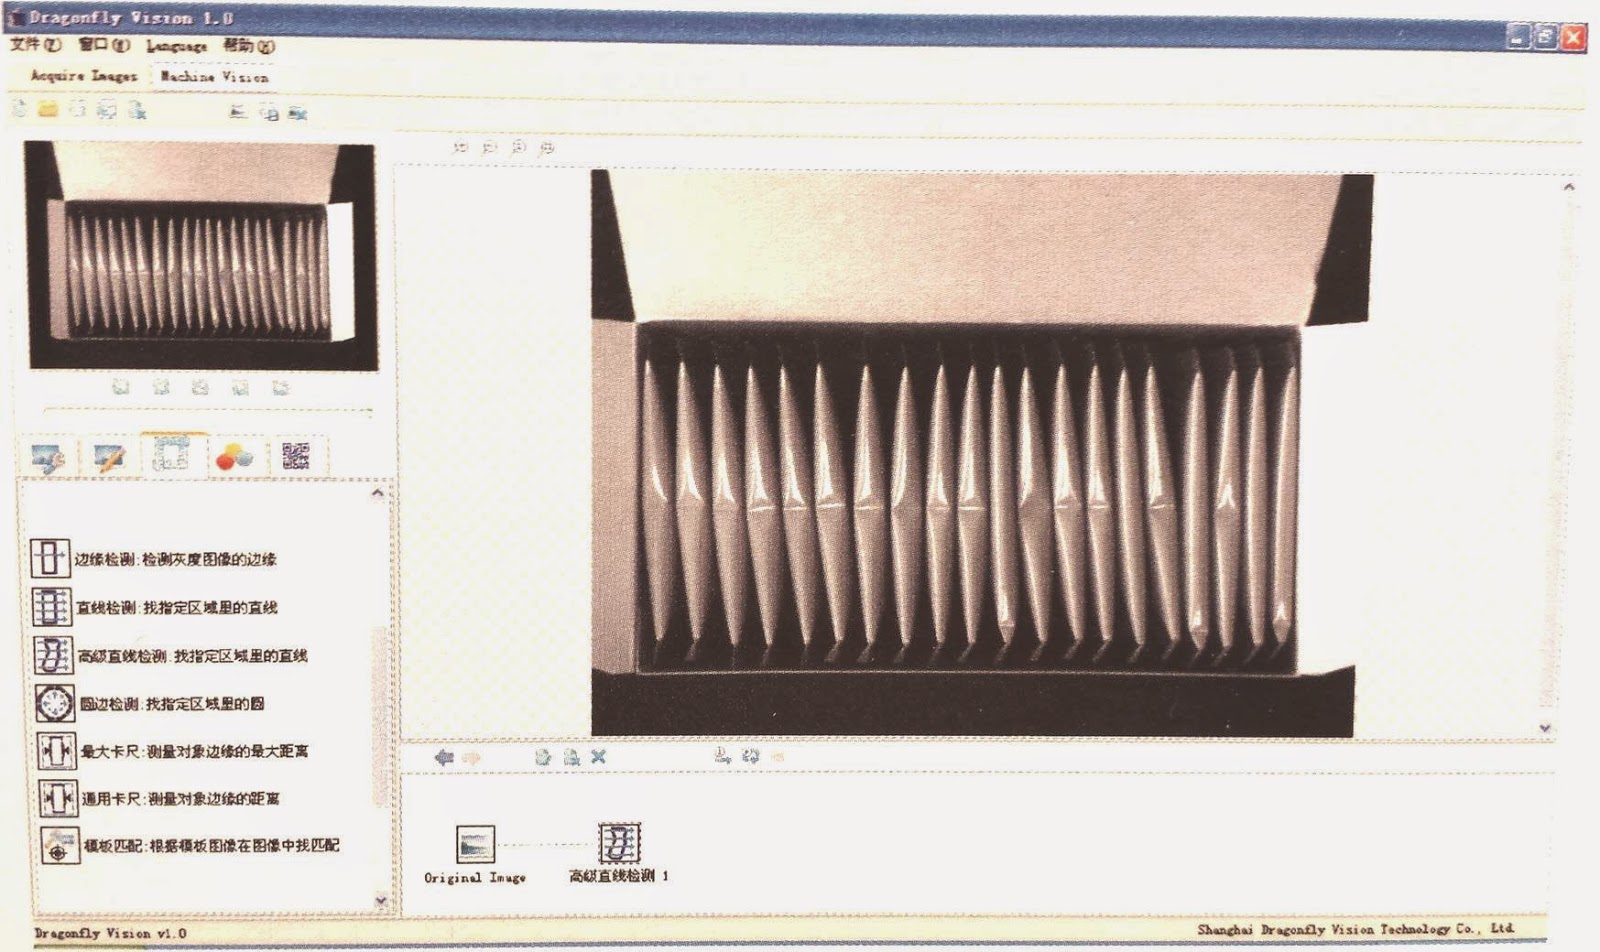 The image shows the DMVTec software doing quantity integrity inspection (aka counting tea bags)